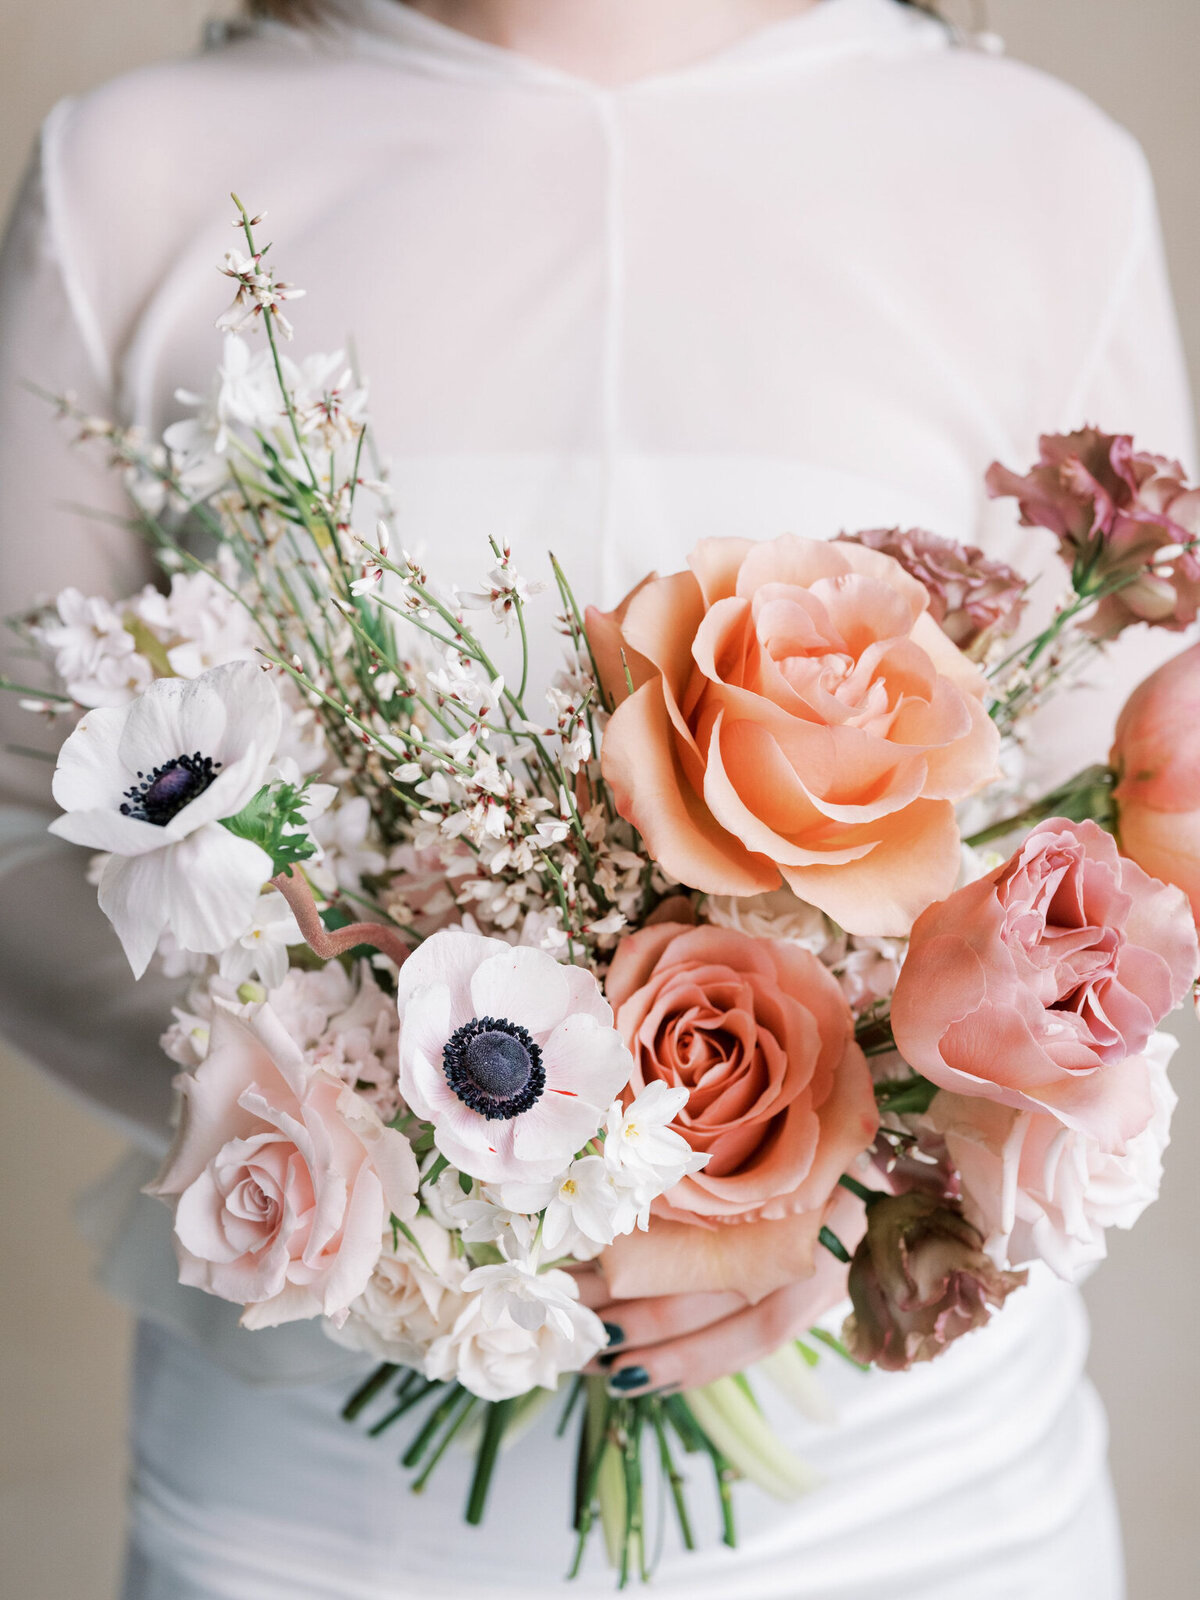 Bridal bouquet of peach, and pink roses by Valley Bloom Co, bright and airy wedding florals based in Kelowna, BC. Featured on the Brontë Bride Vendor Guide.